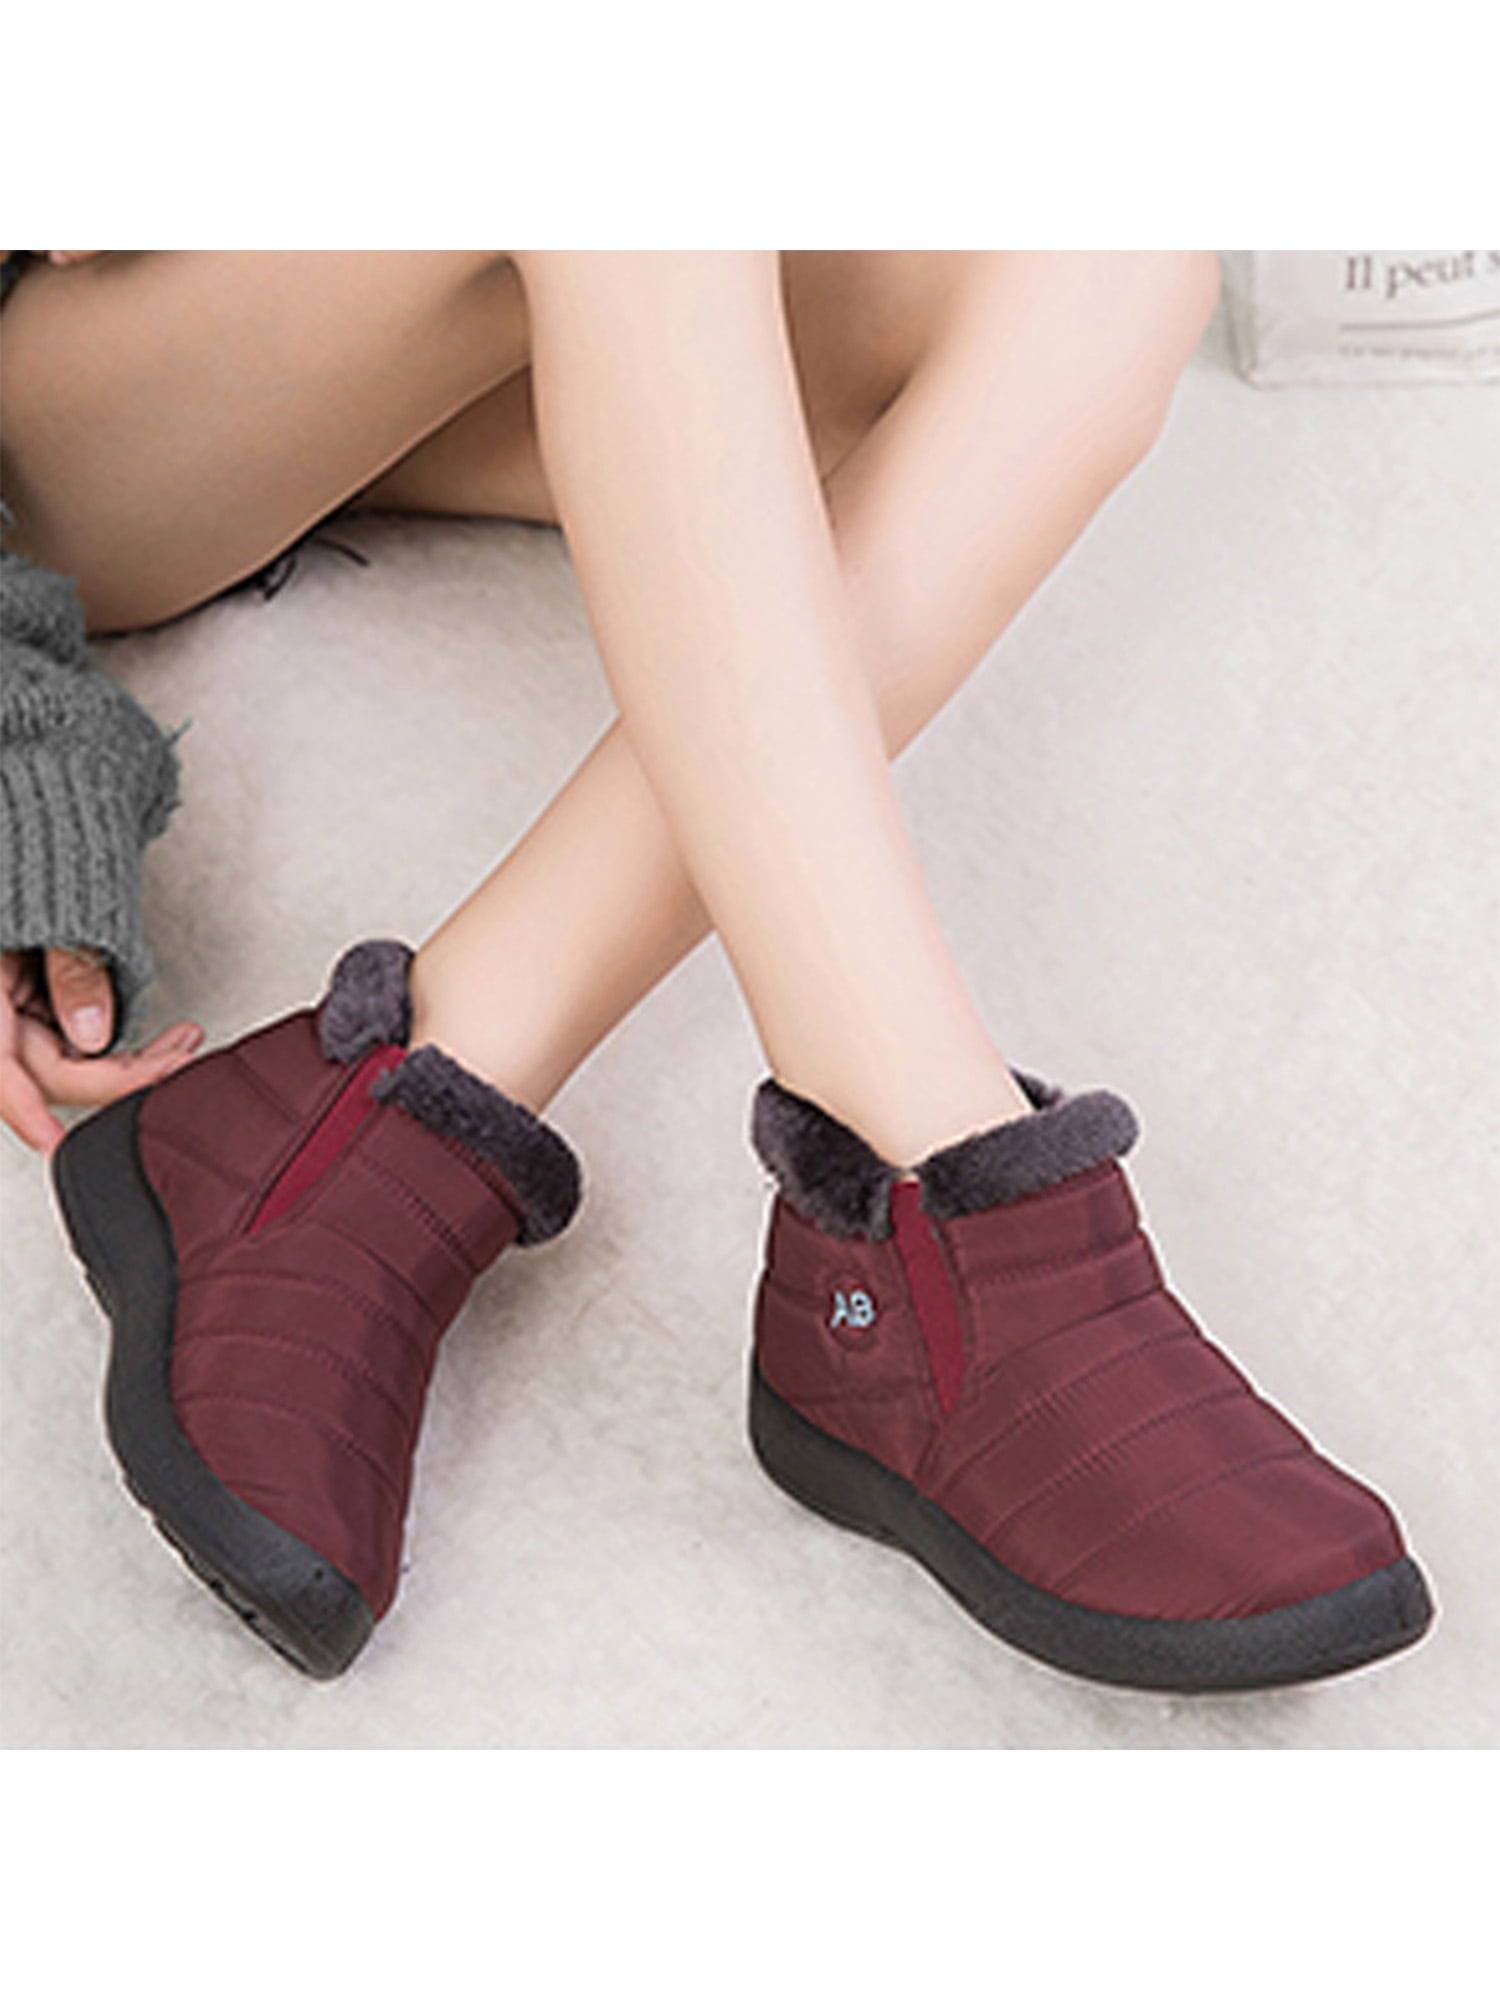 Womens Ladies Ankle boots booties sippers shoes size Winter Warm Indoor Outdoor